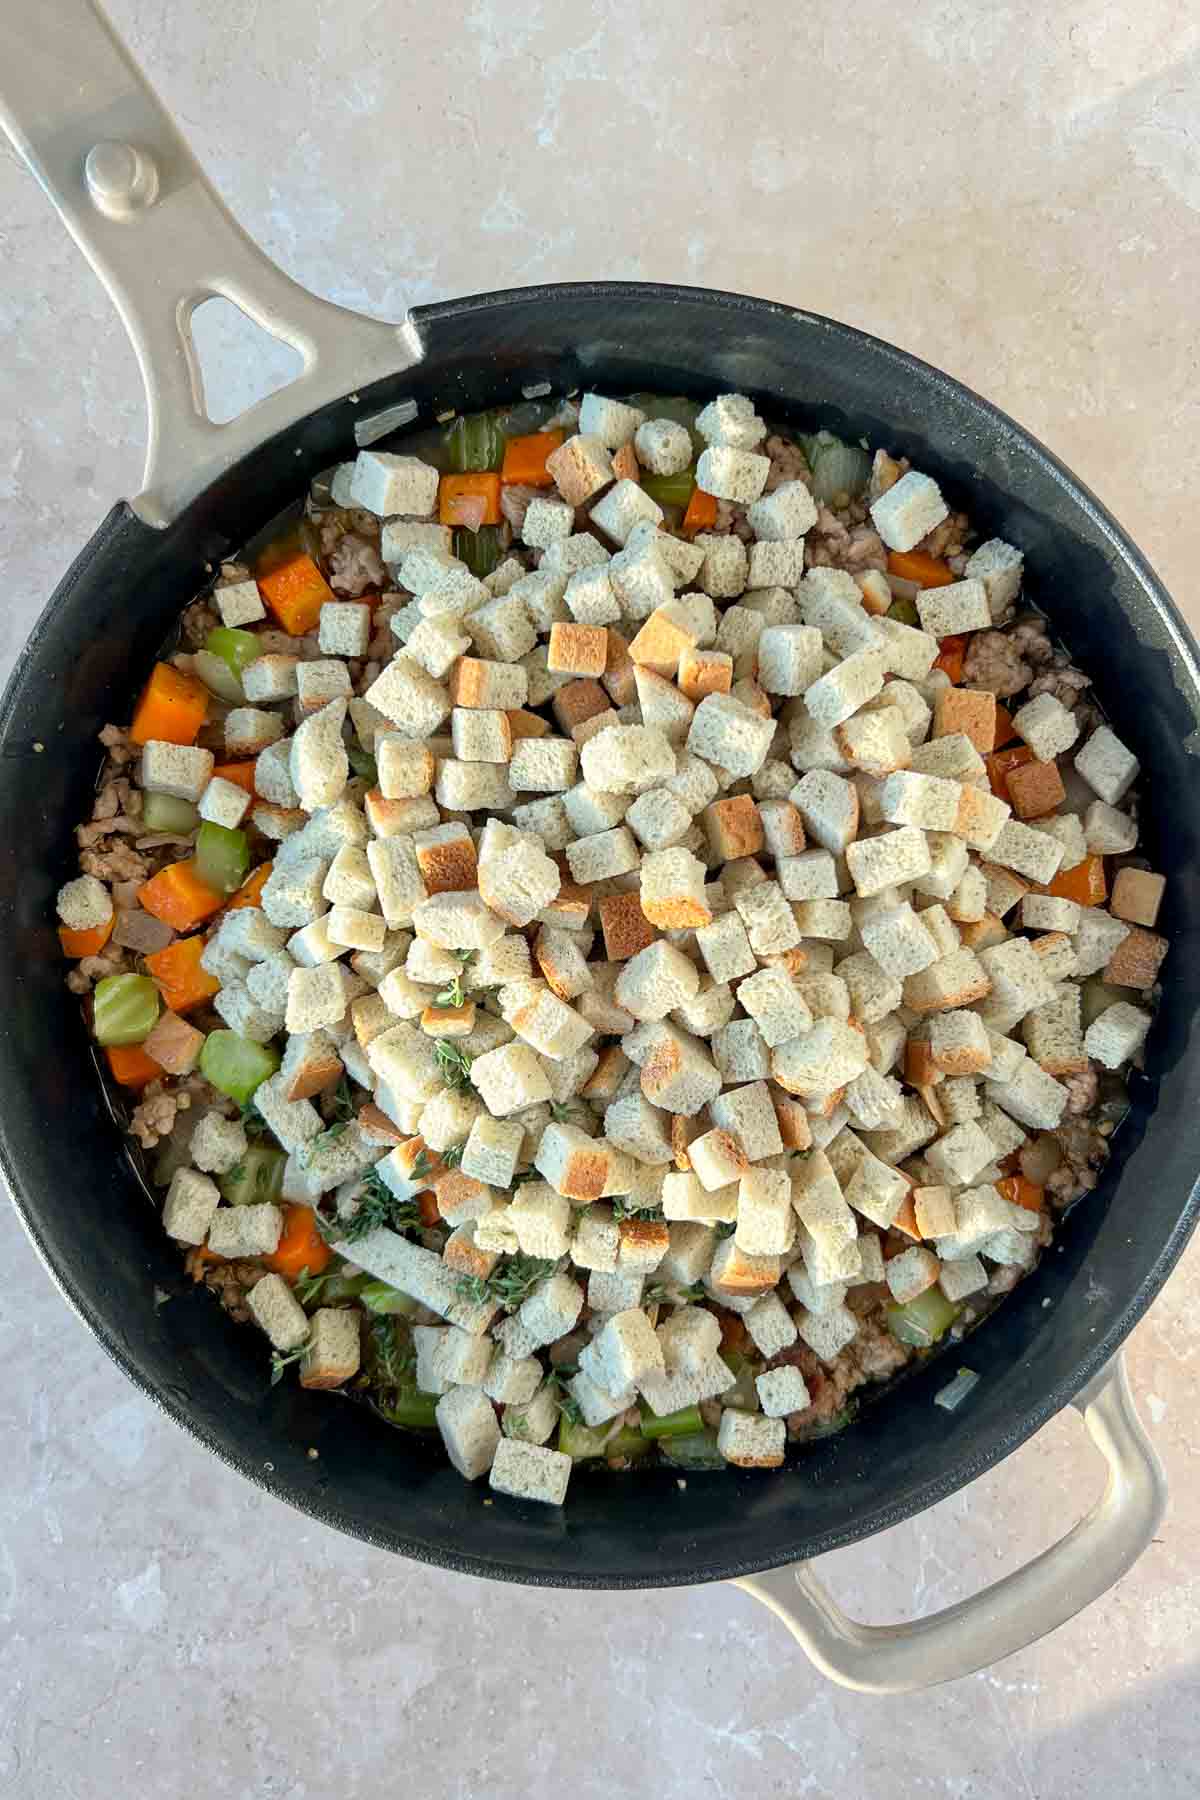 premade stuffing added to skillet with veggies and ground sausage.